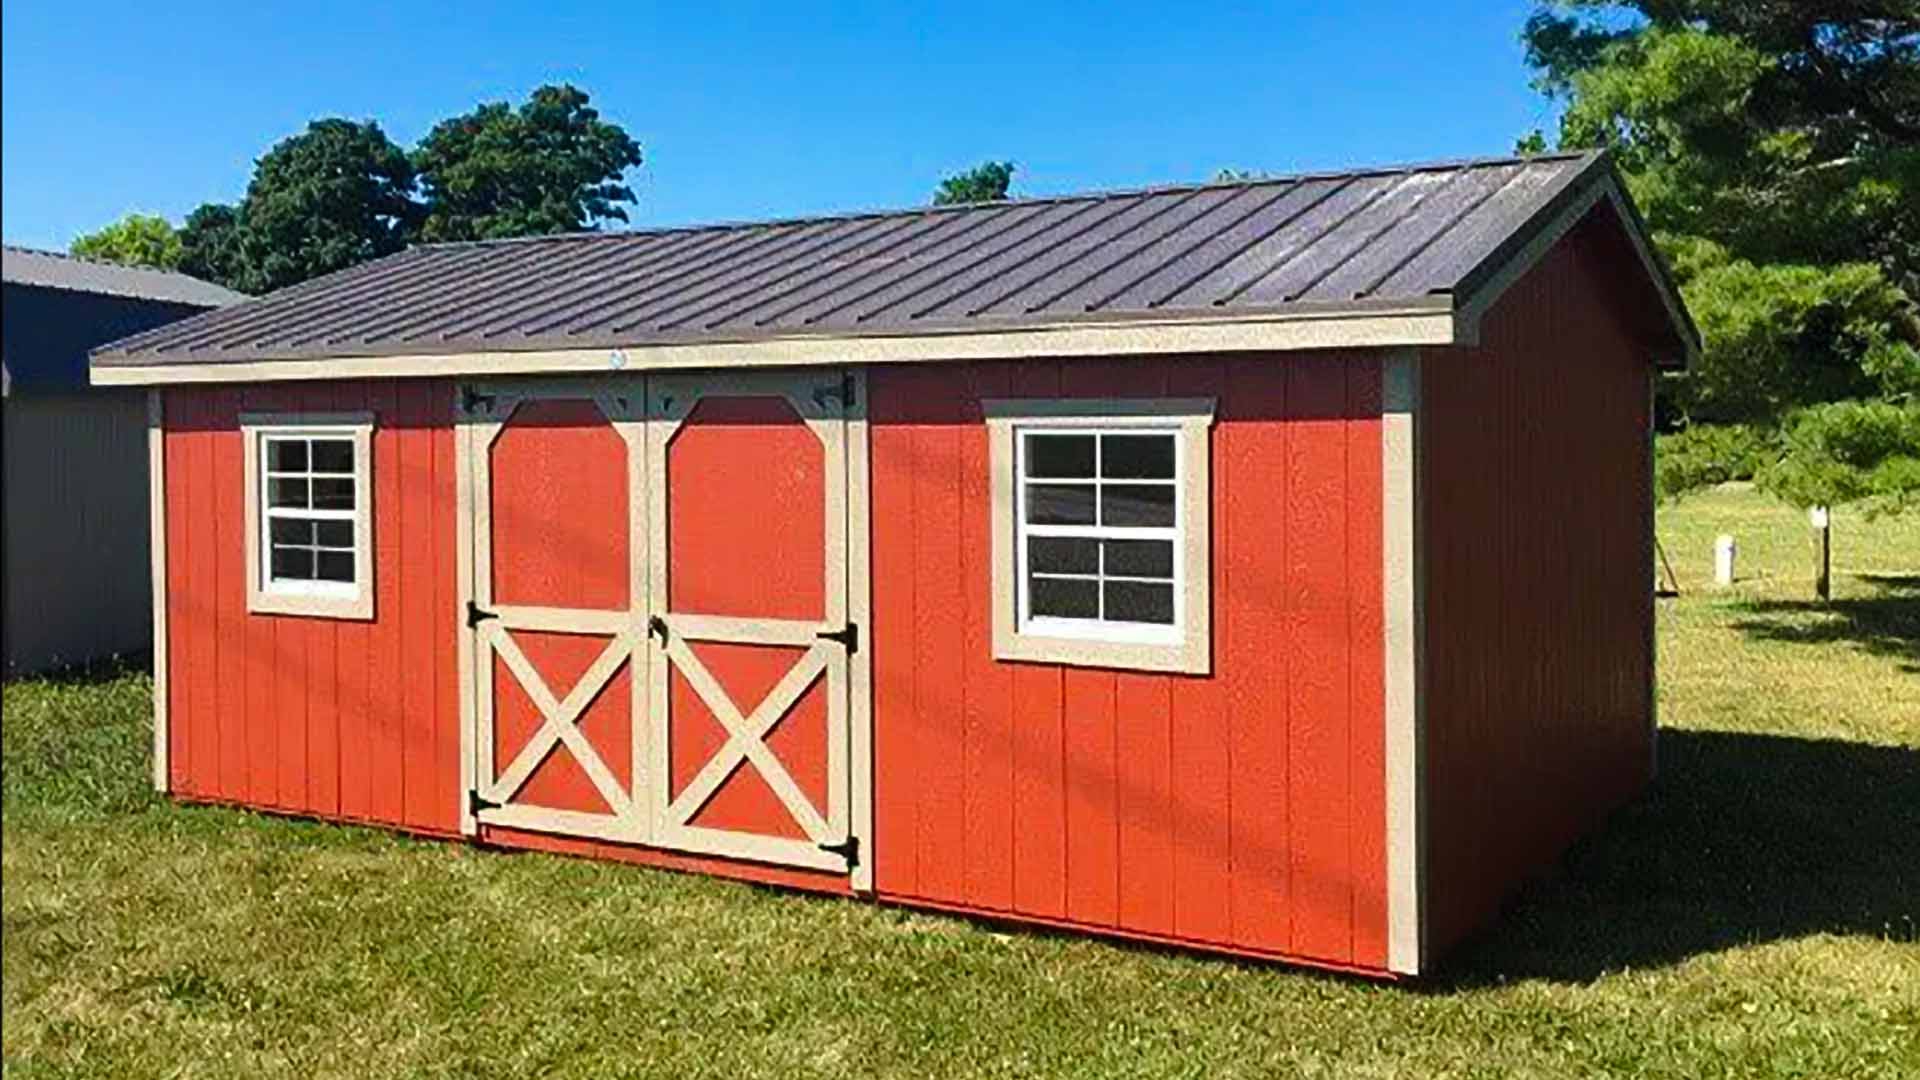 Sun Rise Sheds | Deciding Between A Shingle Or Metal Shed Roof: What You Need To Know